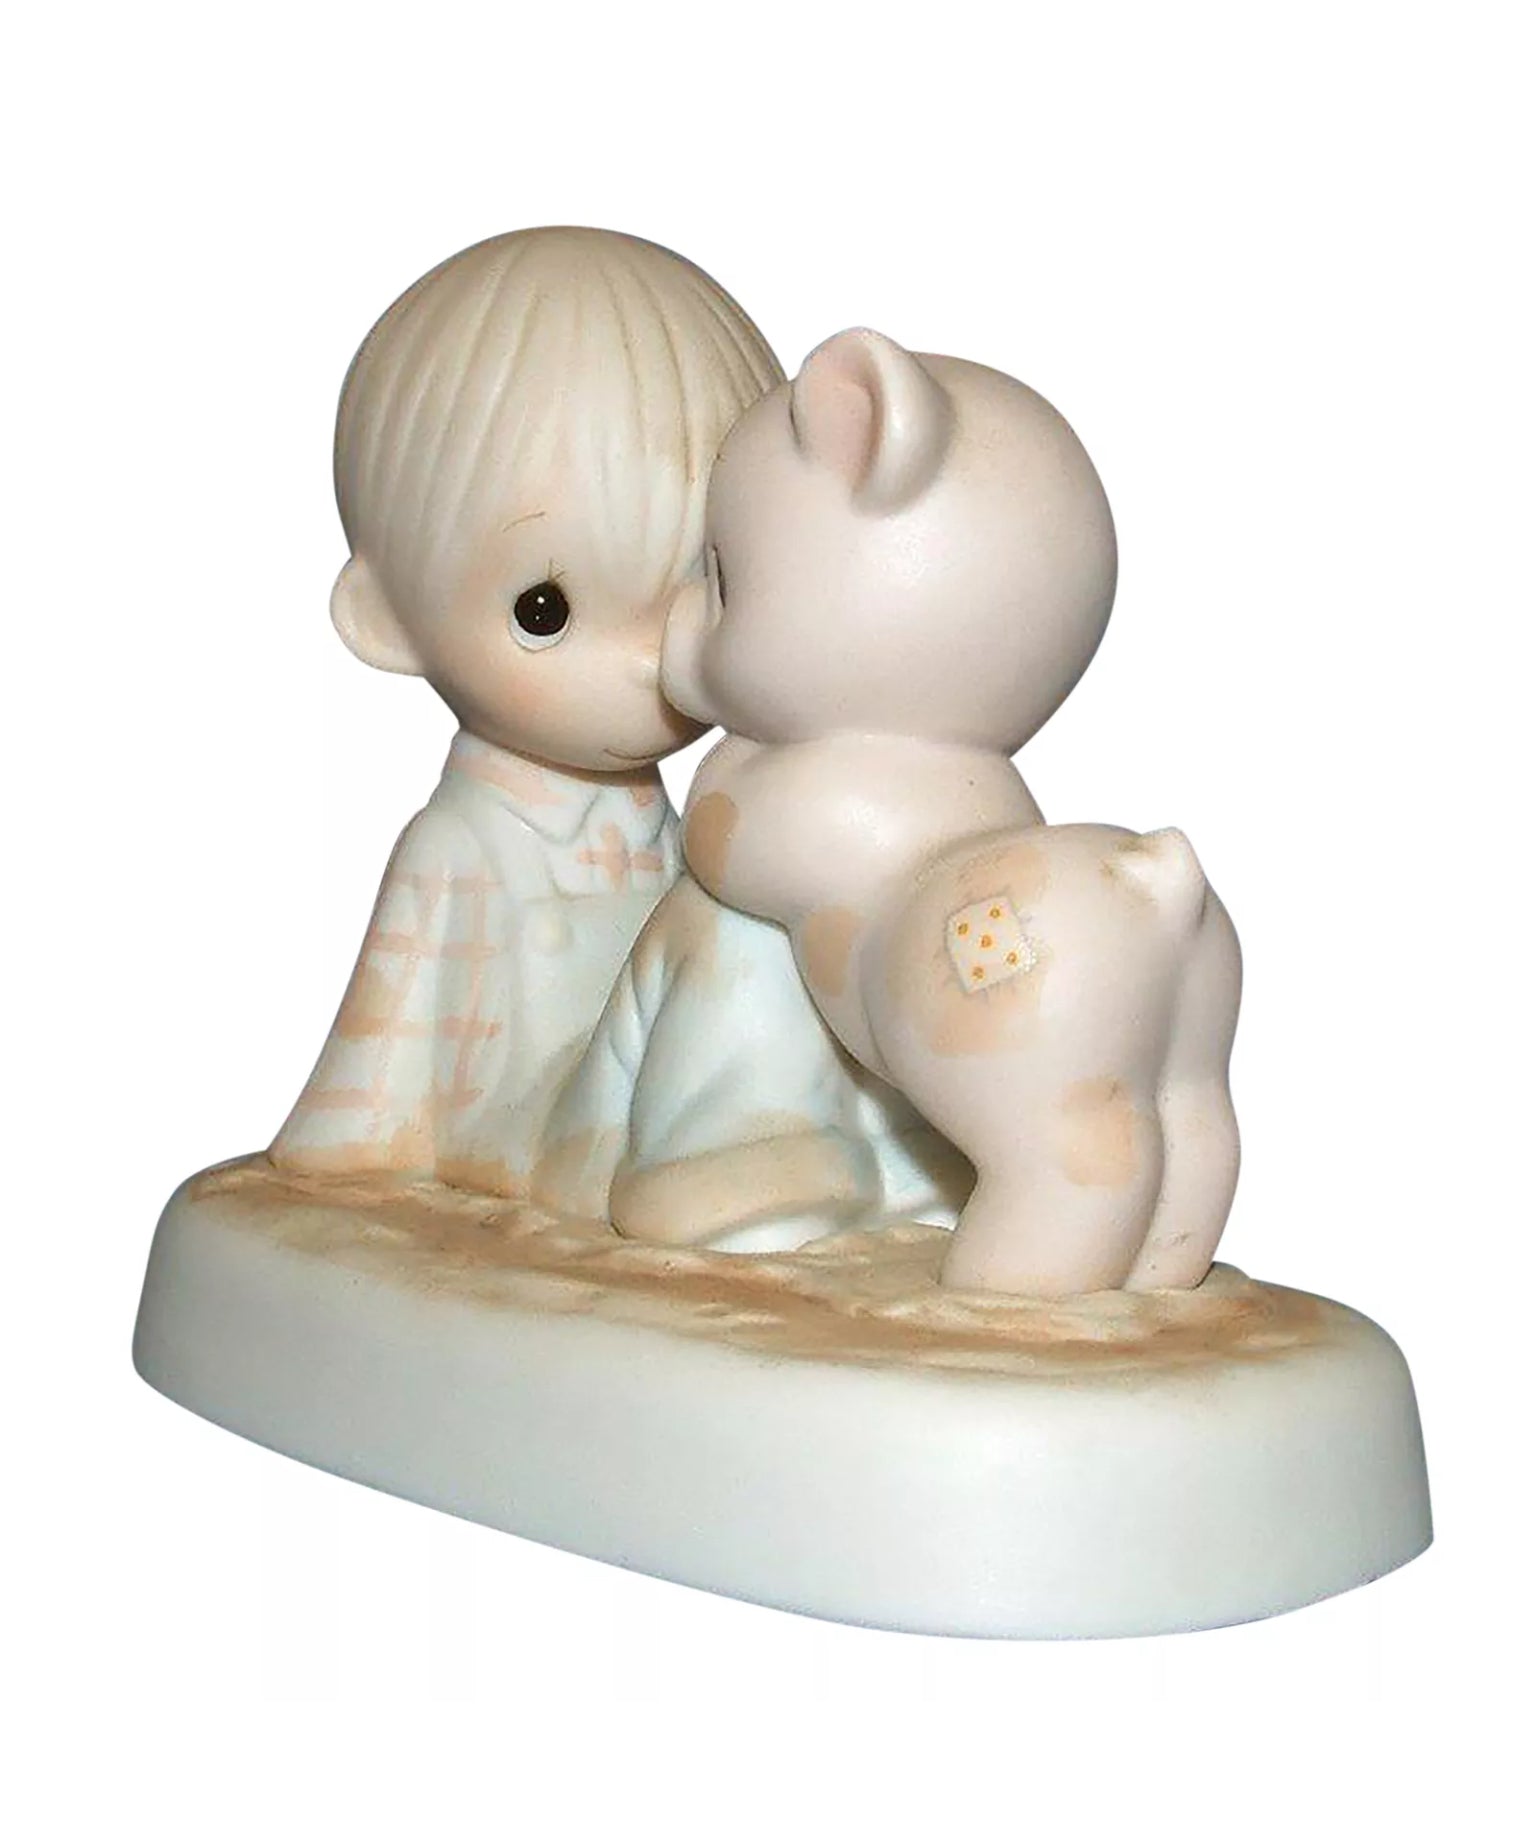 We're In It Together - Precious Moment Figurine